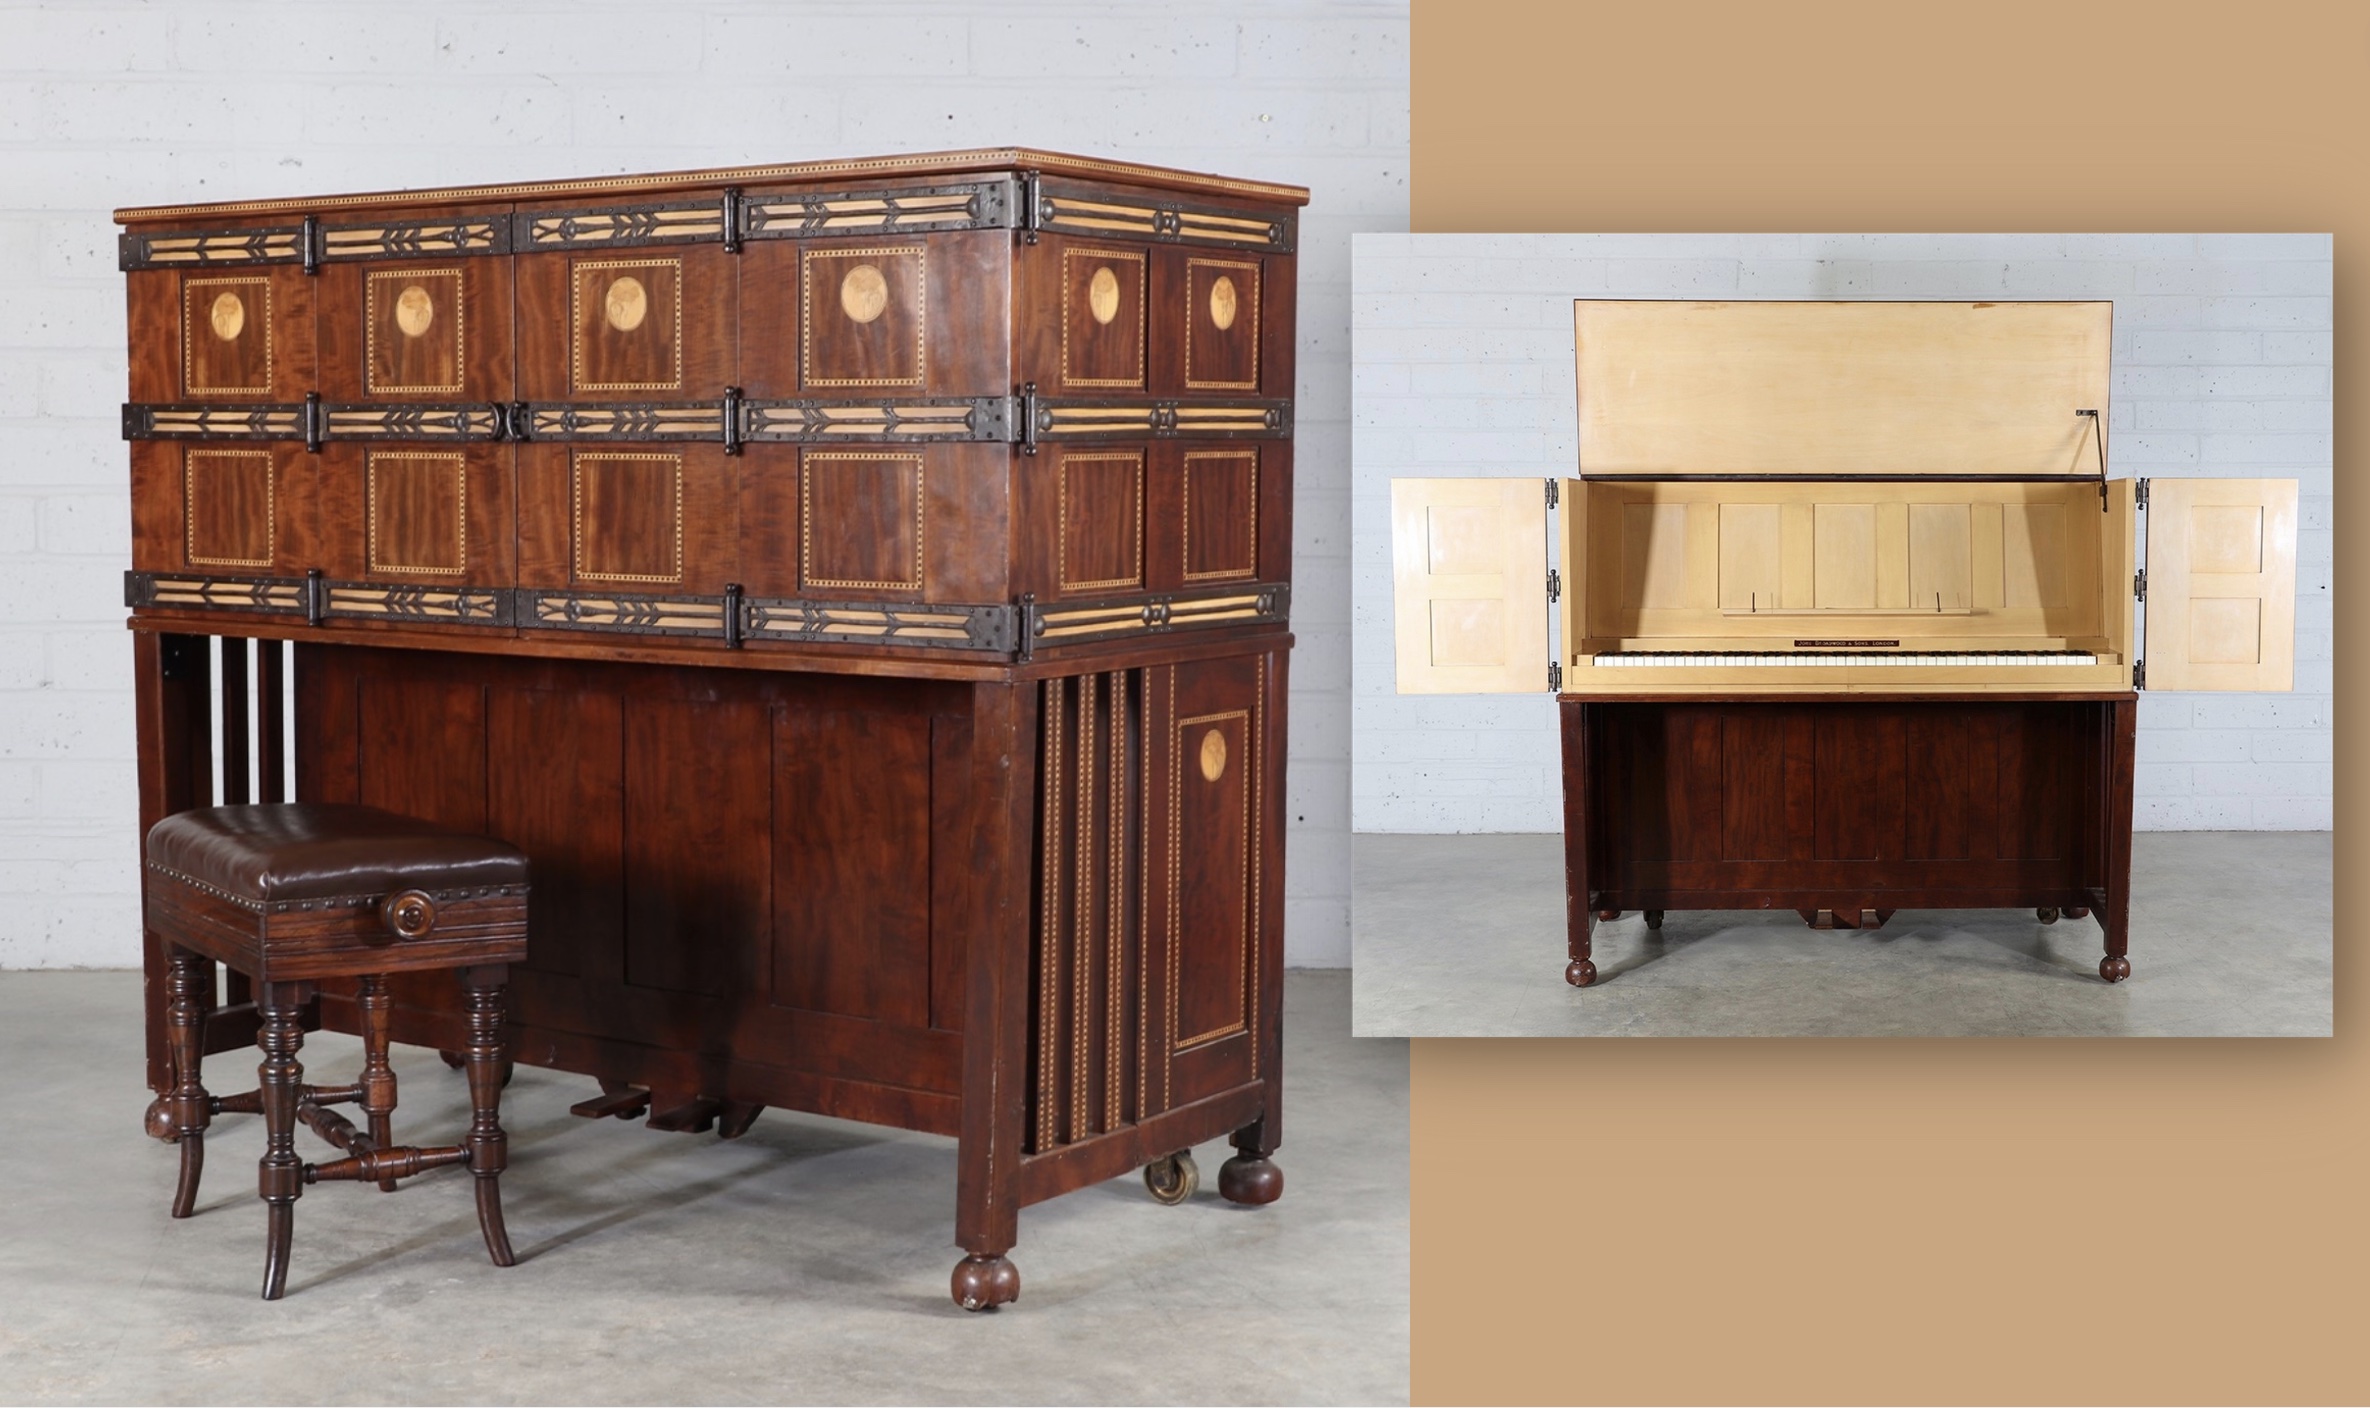 Charles Robert Ashbee piano in Essex sale – Antique Collecting